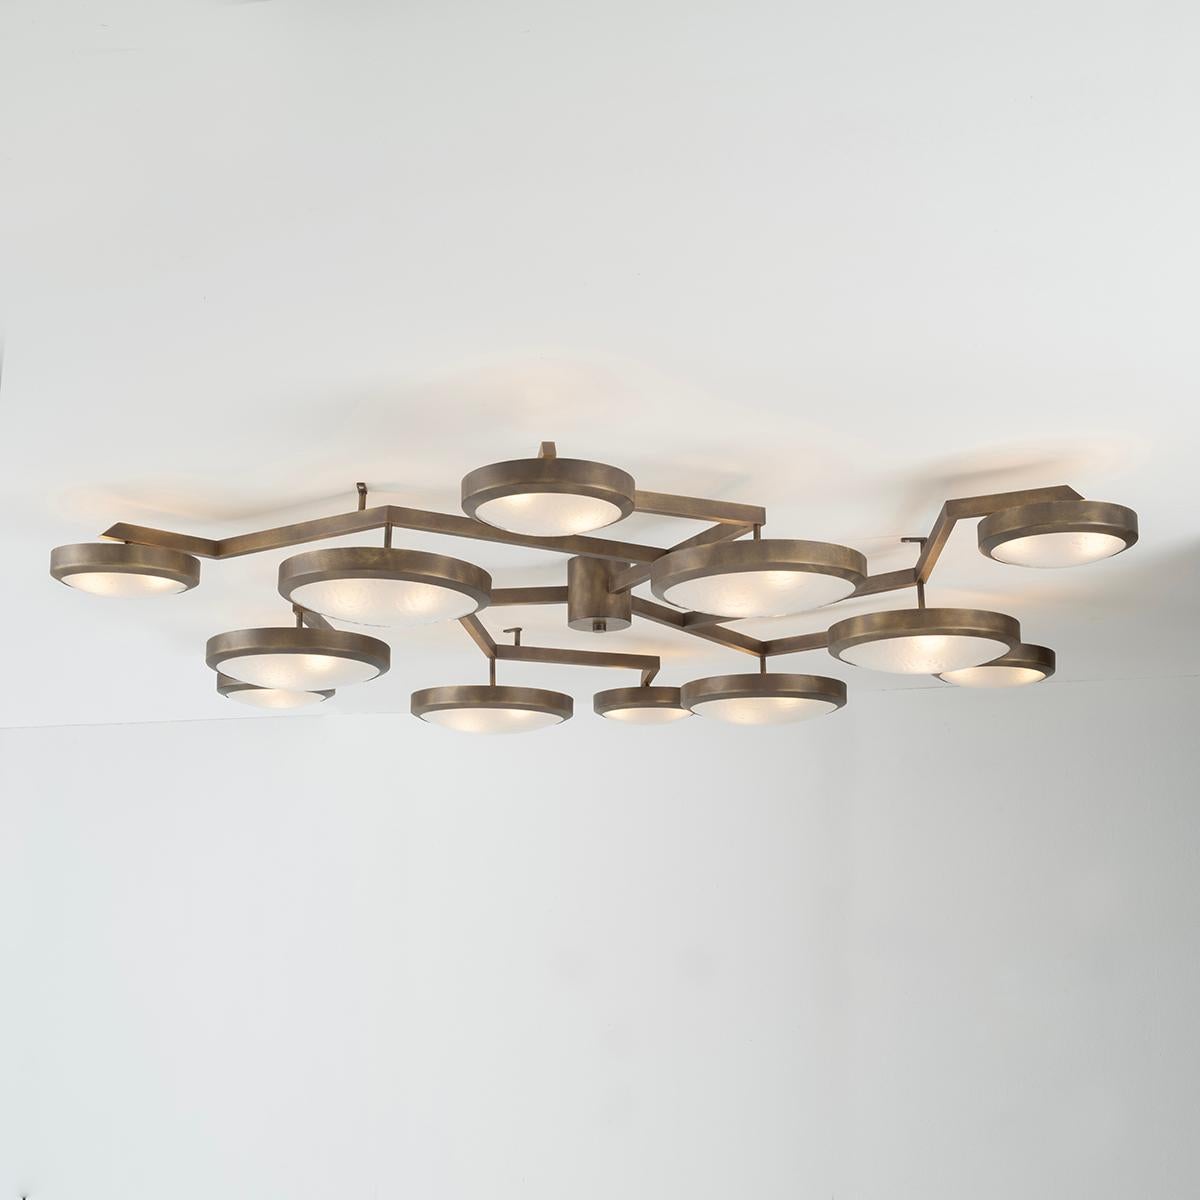 Nuvola Ceiling Light by Gaspare Asaro - Polished Brass Finish In New Condition For Sale In New York, NY